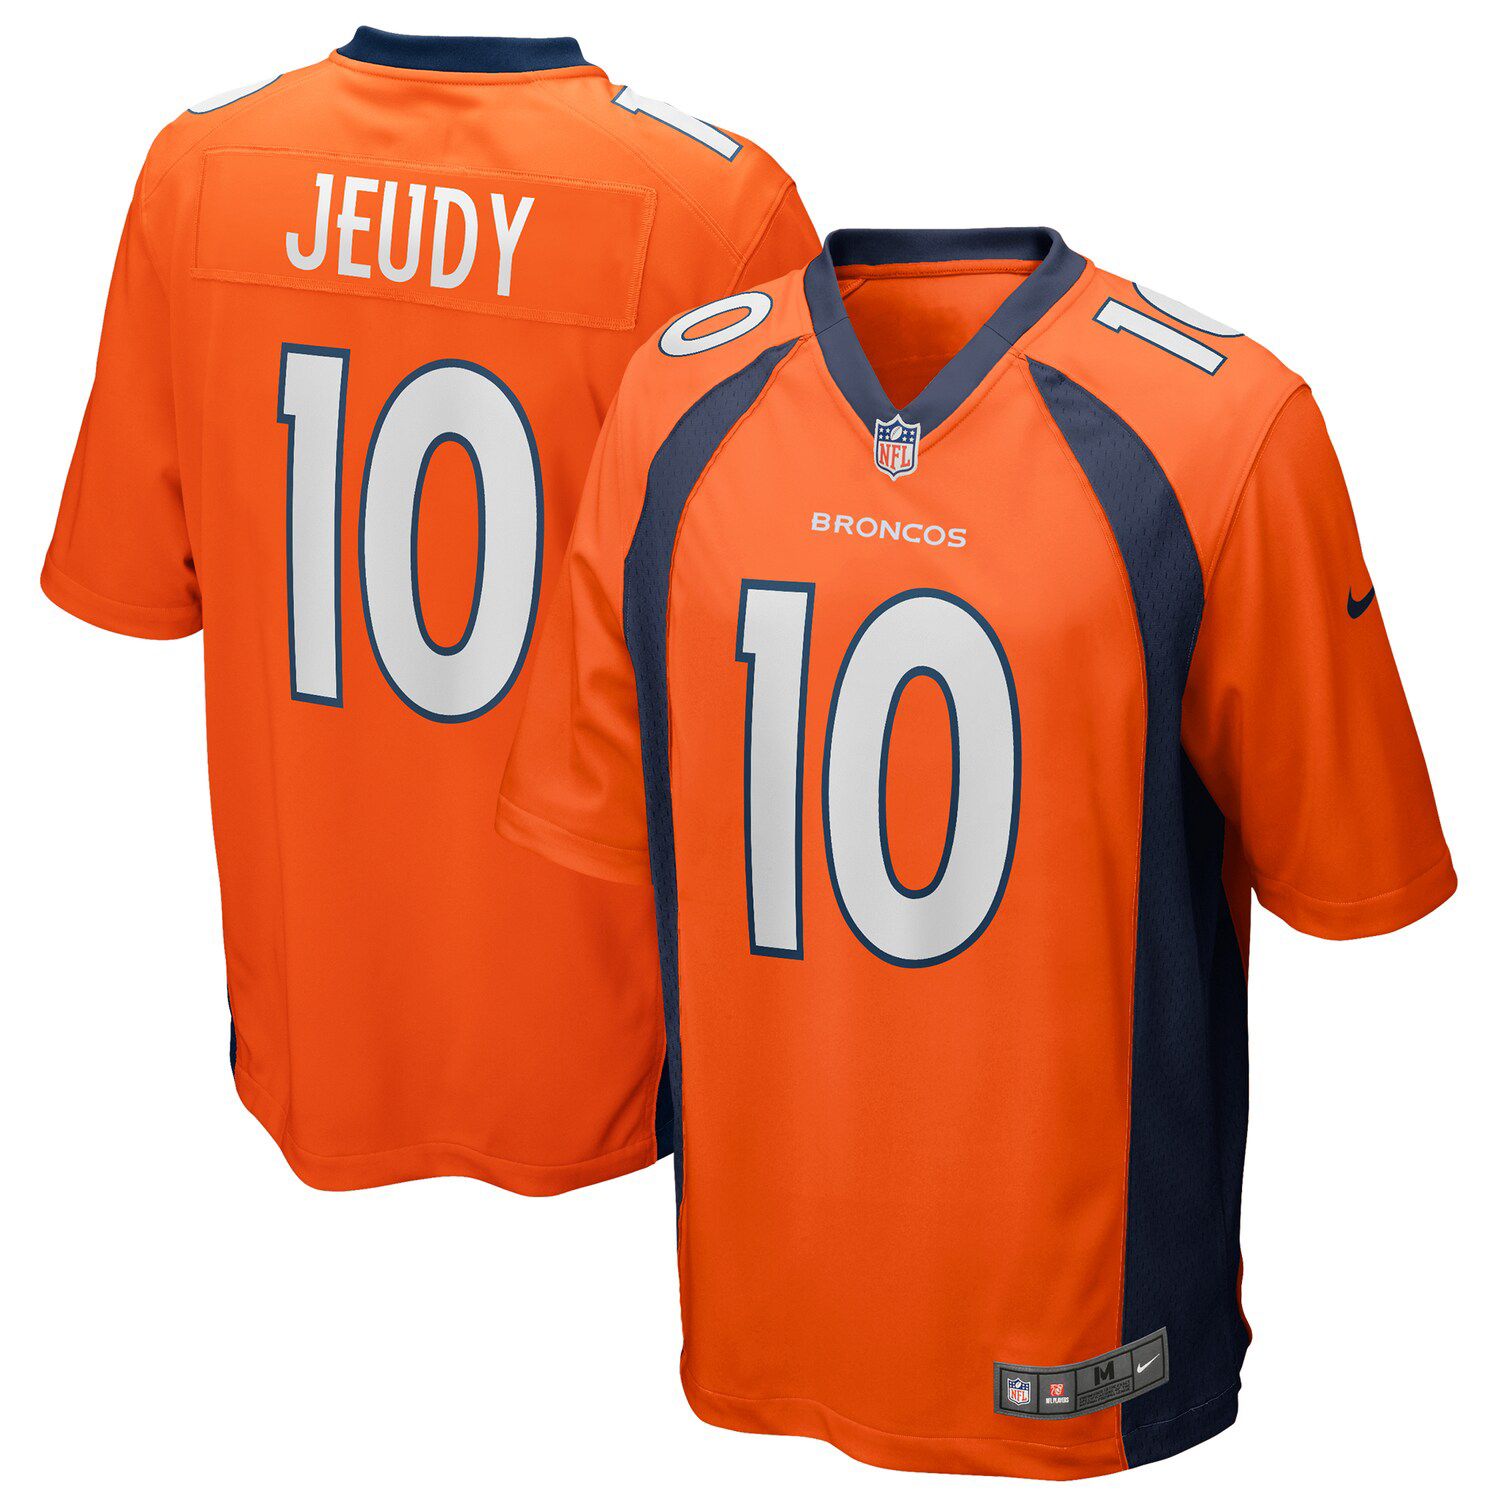 courtland sutton youth jersey